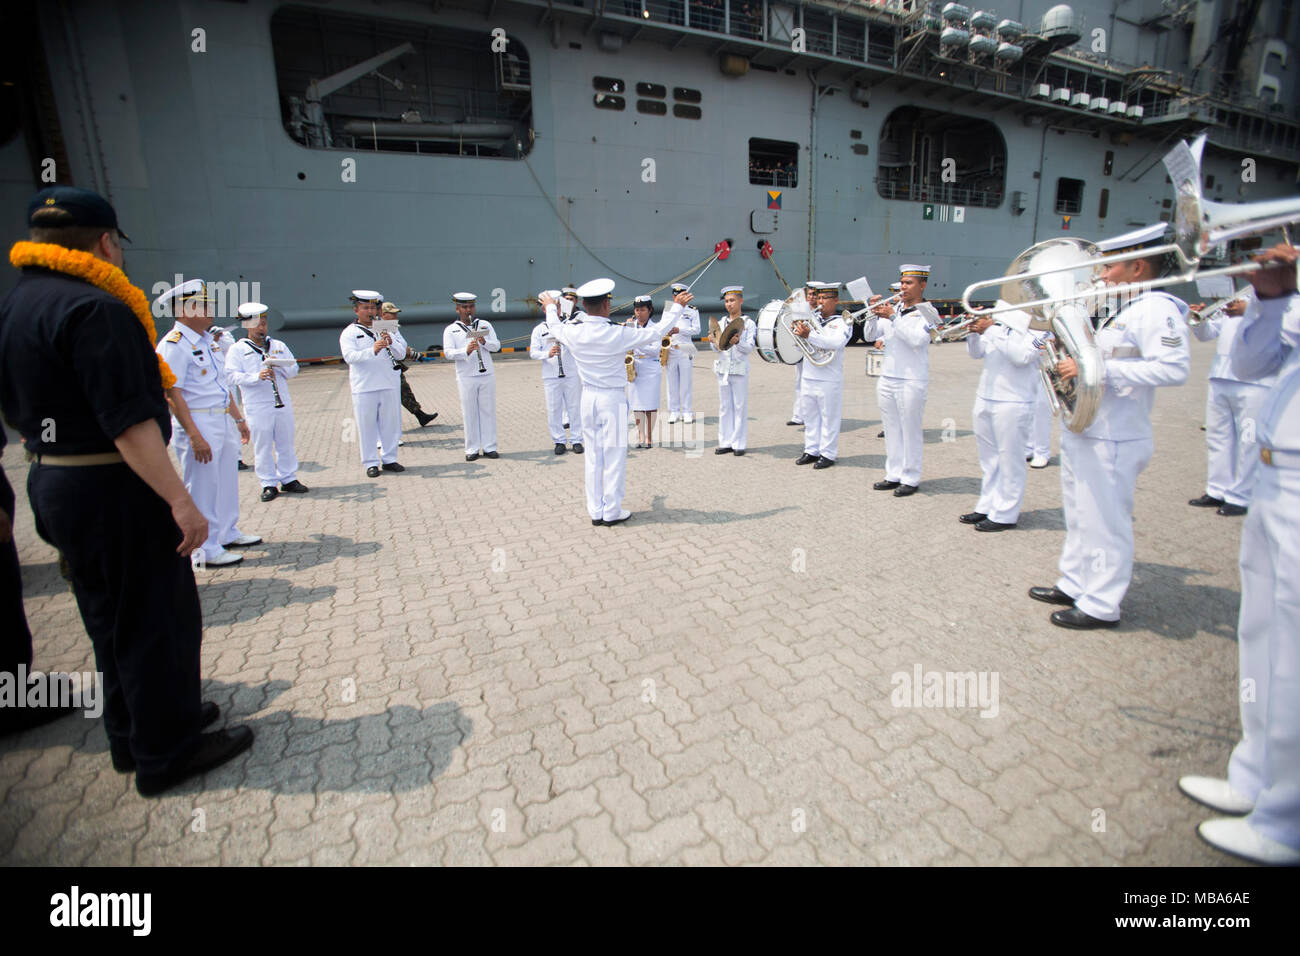 The Royal Thai Navy Band performs during the arrival of the USS Bonhomme Richard (LHD 6) at Laem Chabang International Terminal, Thailand, Feb. 11, 2018. The Bonhomme Richard is a Wasp-class amphibious assault ship with a home port in Sasebo, Japan. While in port, the Bonhomme Richard will embark U.S. Marine and Navy personnel, vehicles and equipment before sailing alongside the Royal Thai Navy and Republic of Korea ships as part of Exercise Cobra Gold 18, an annual exercise conducted in the Kingdom of Thailand held from Feb. 13-23 with seven nations participating. (U.S. Marine Corps Stock Photo